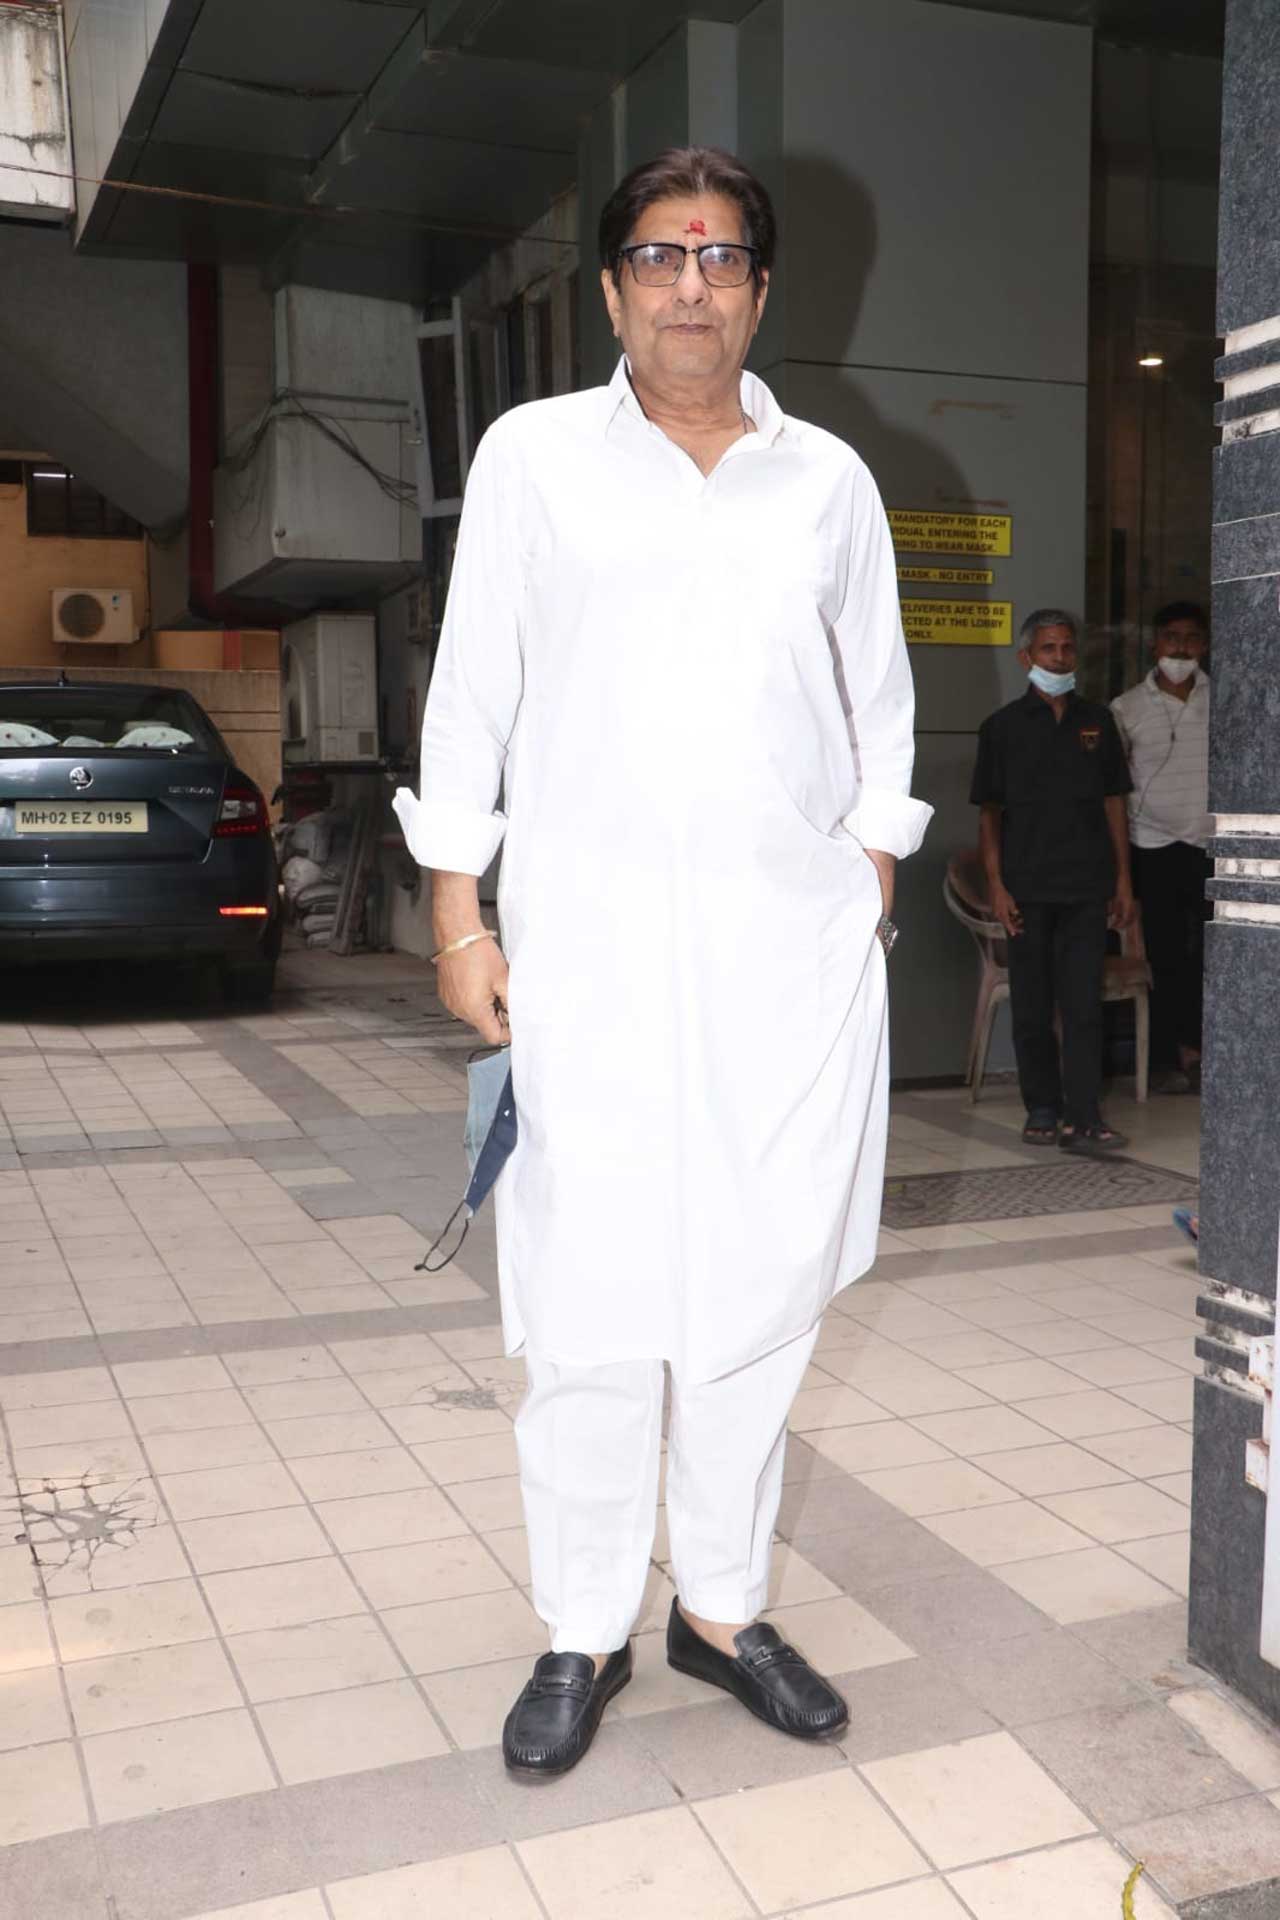 Varun Dhawan's uncle Anil Dhawan too was spotted arriving for the pooja. He wore a white kurta pyjama and posed for pictures.